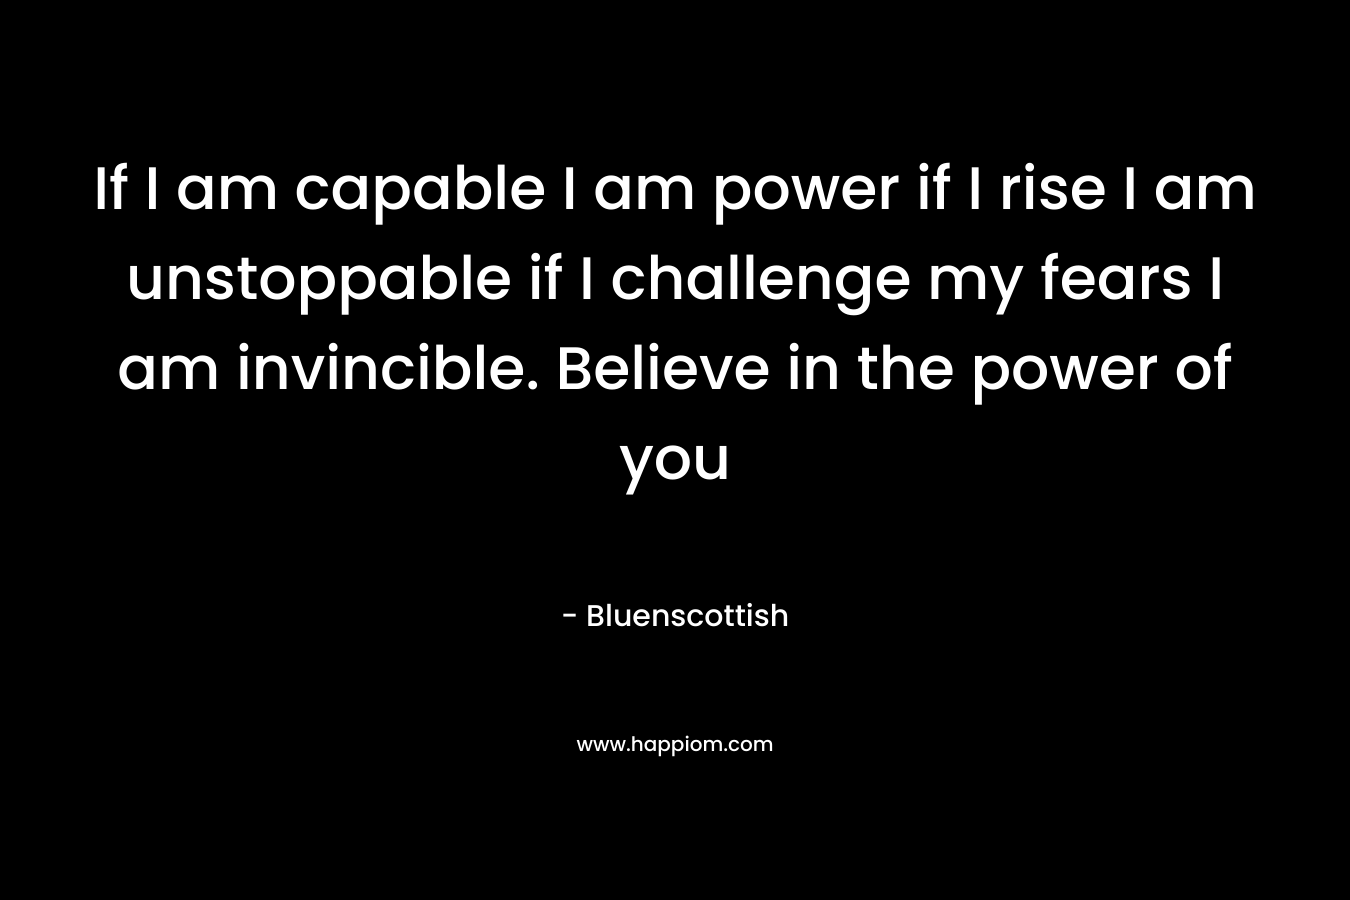 If I am capable I am power if I rise I am unstoppable if I challenge my fears I am invincible. Believe in the power of you